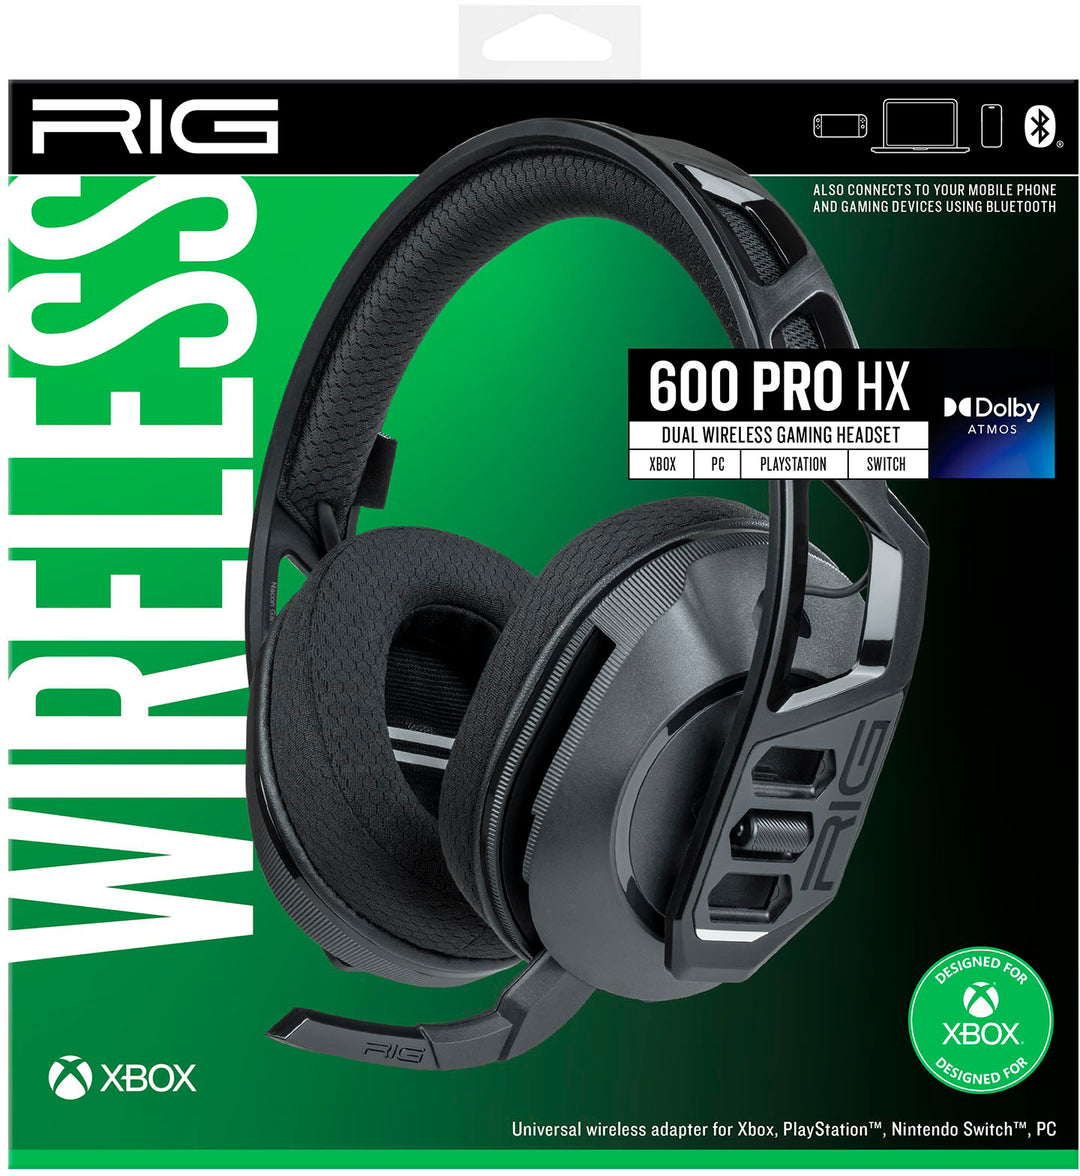 RIG - 600 Pro HX Wireless Over-the-Ear Gaming Headset - Black_2